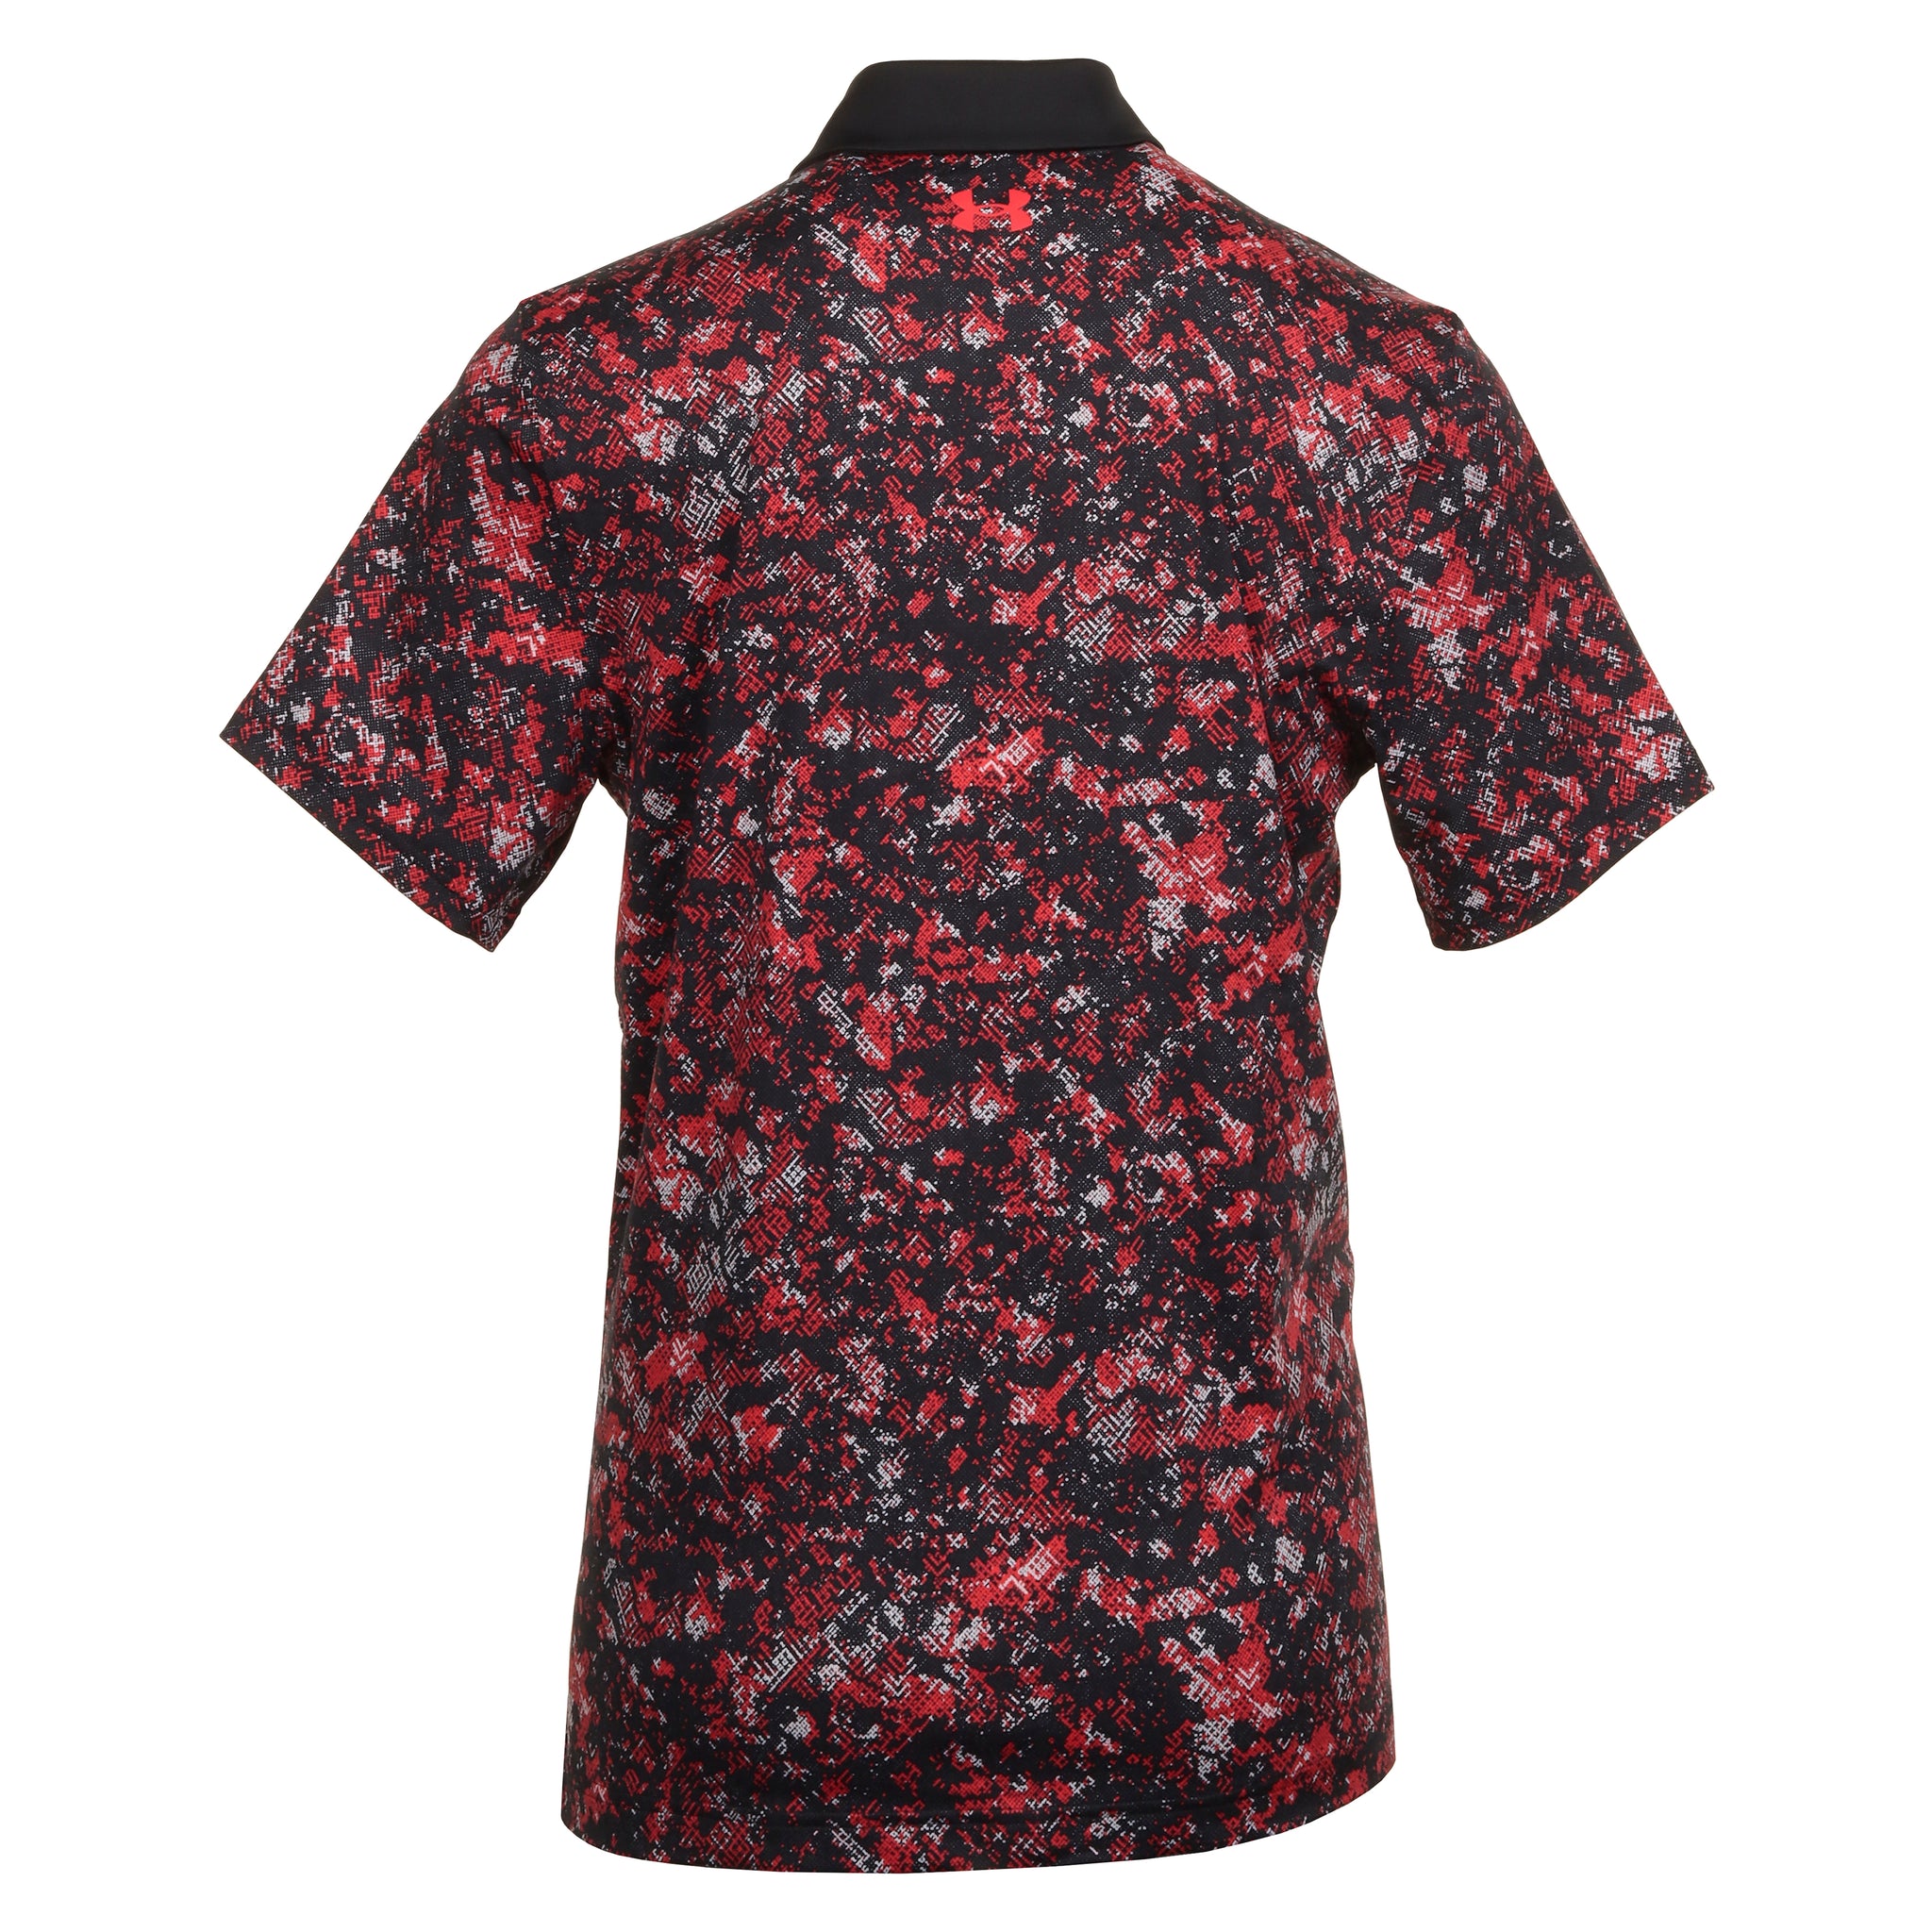 under-armour-golf-t2g-printed-shirt-1383715-black-red-solstice-002